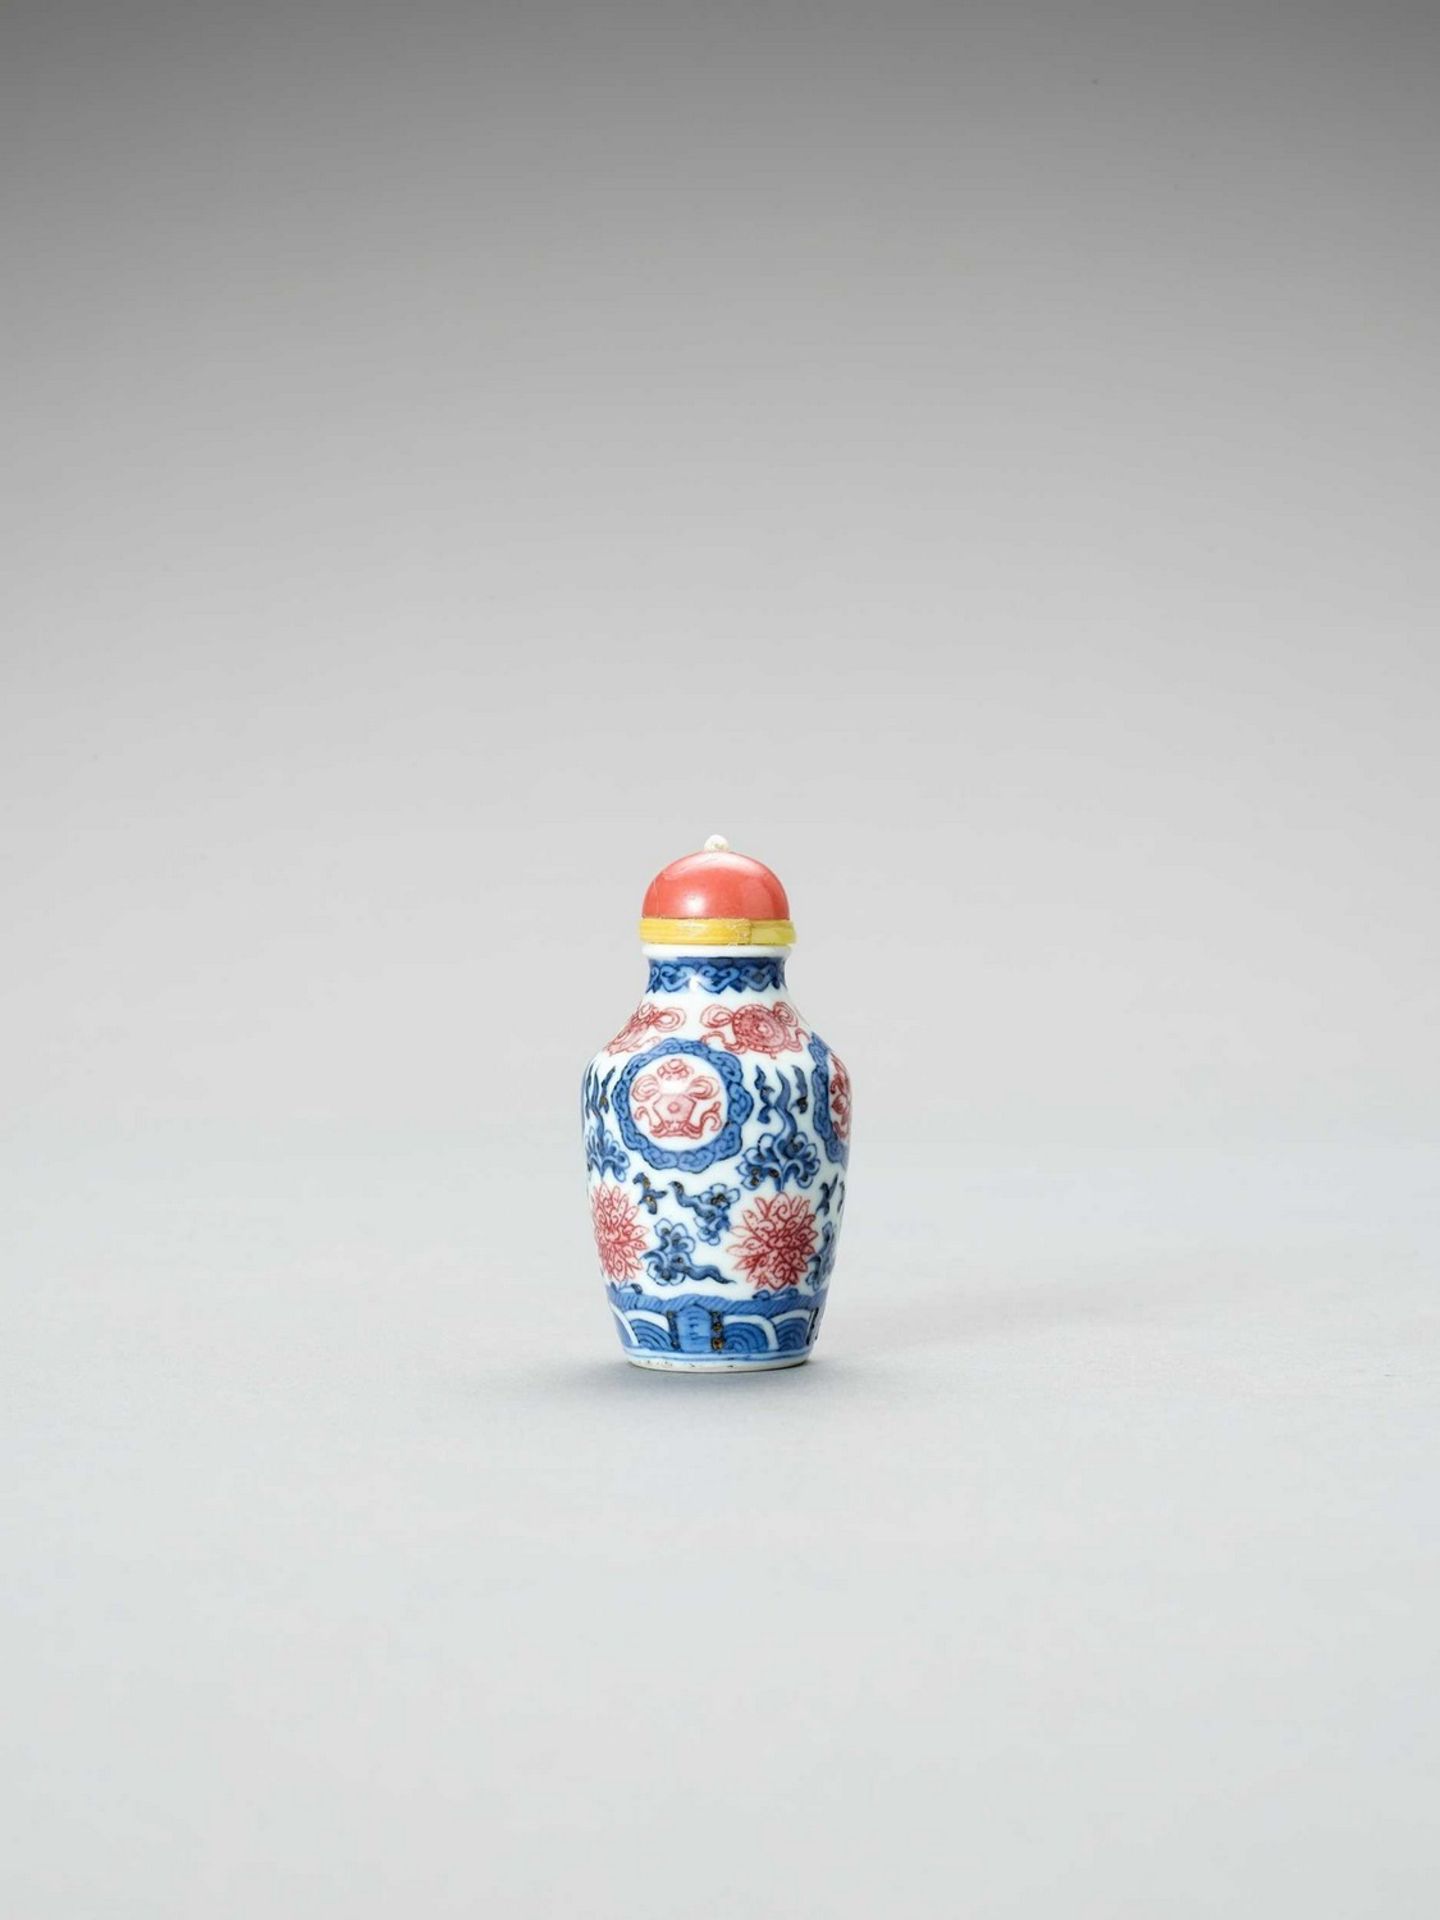 AN IRON-RED, BLUE AND WHITE PORCELAIN SNUFF BOTTLE - Image 3 of 6